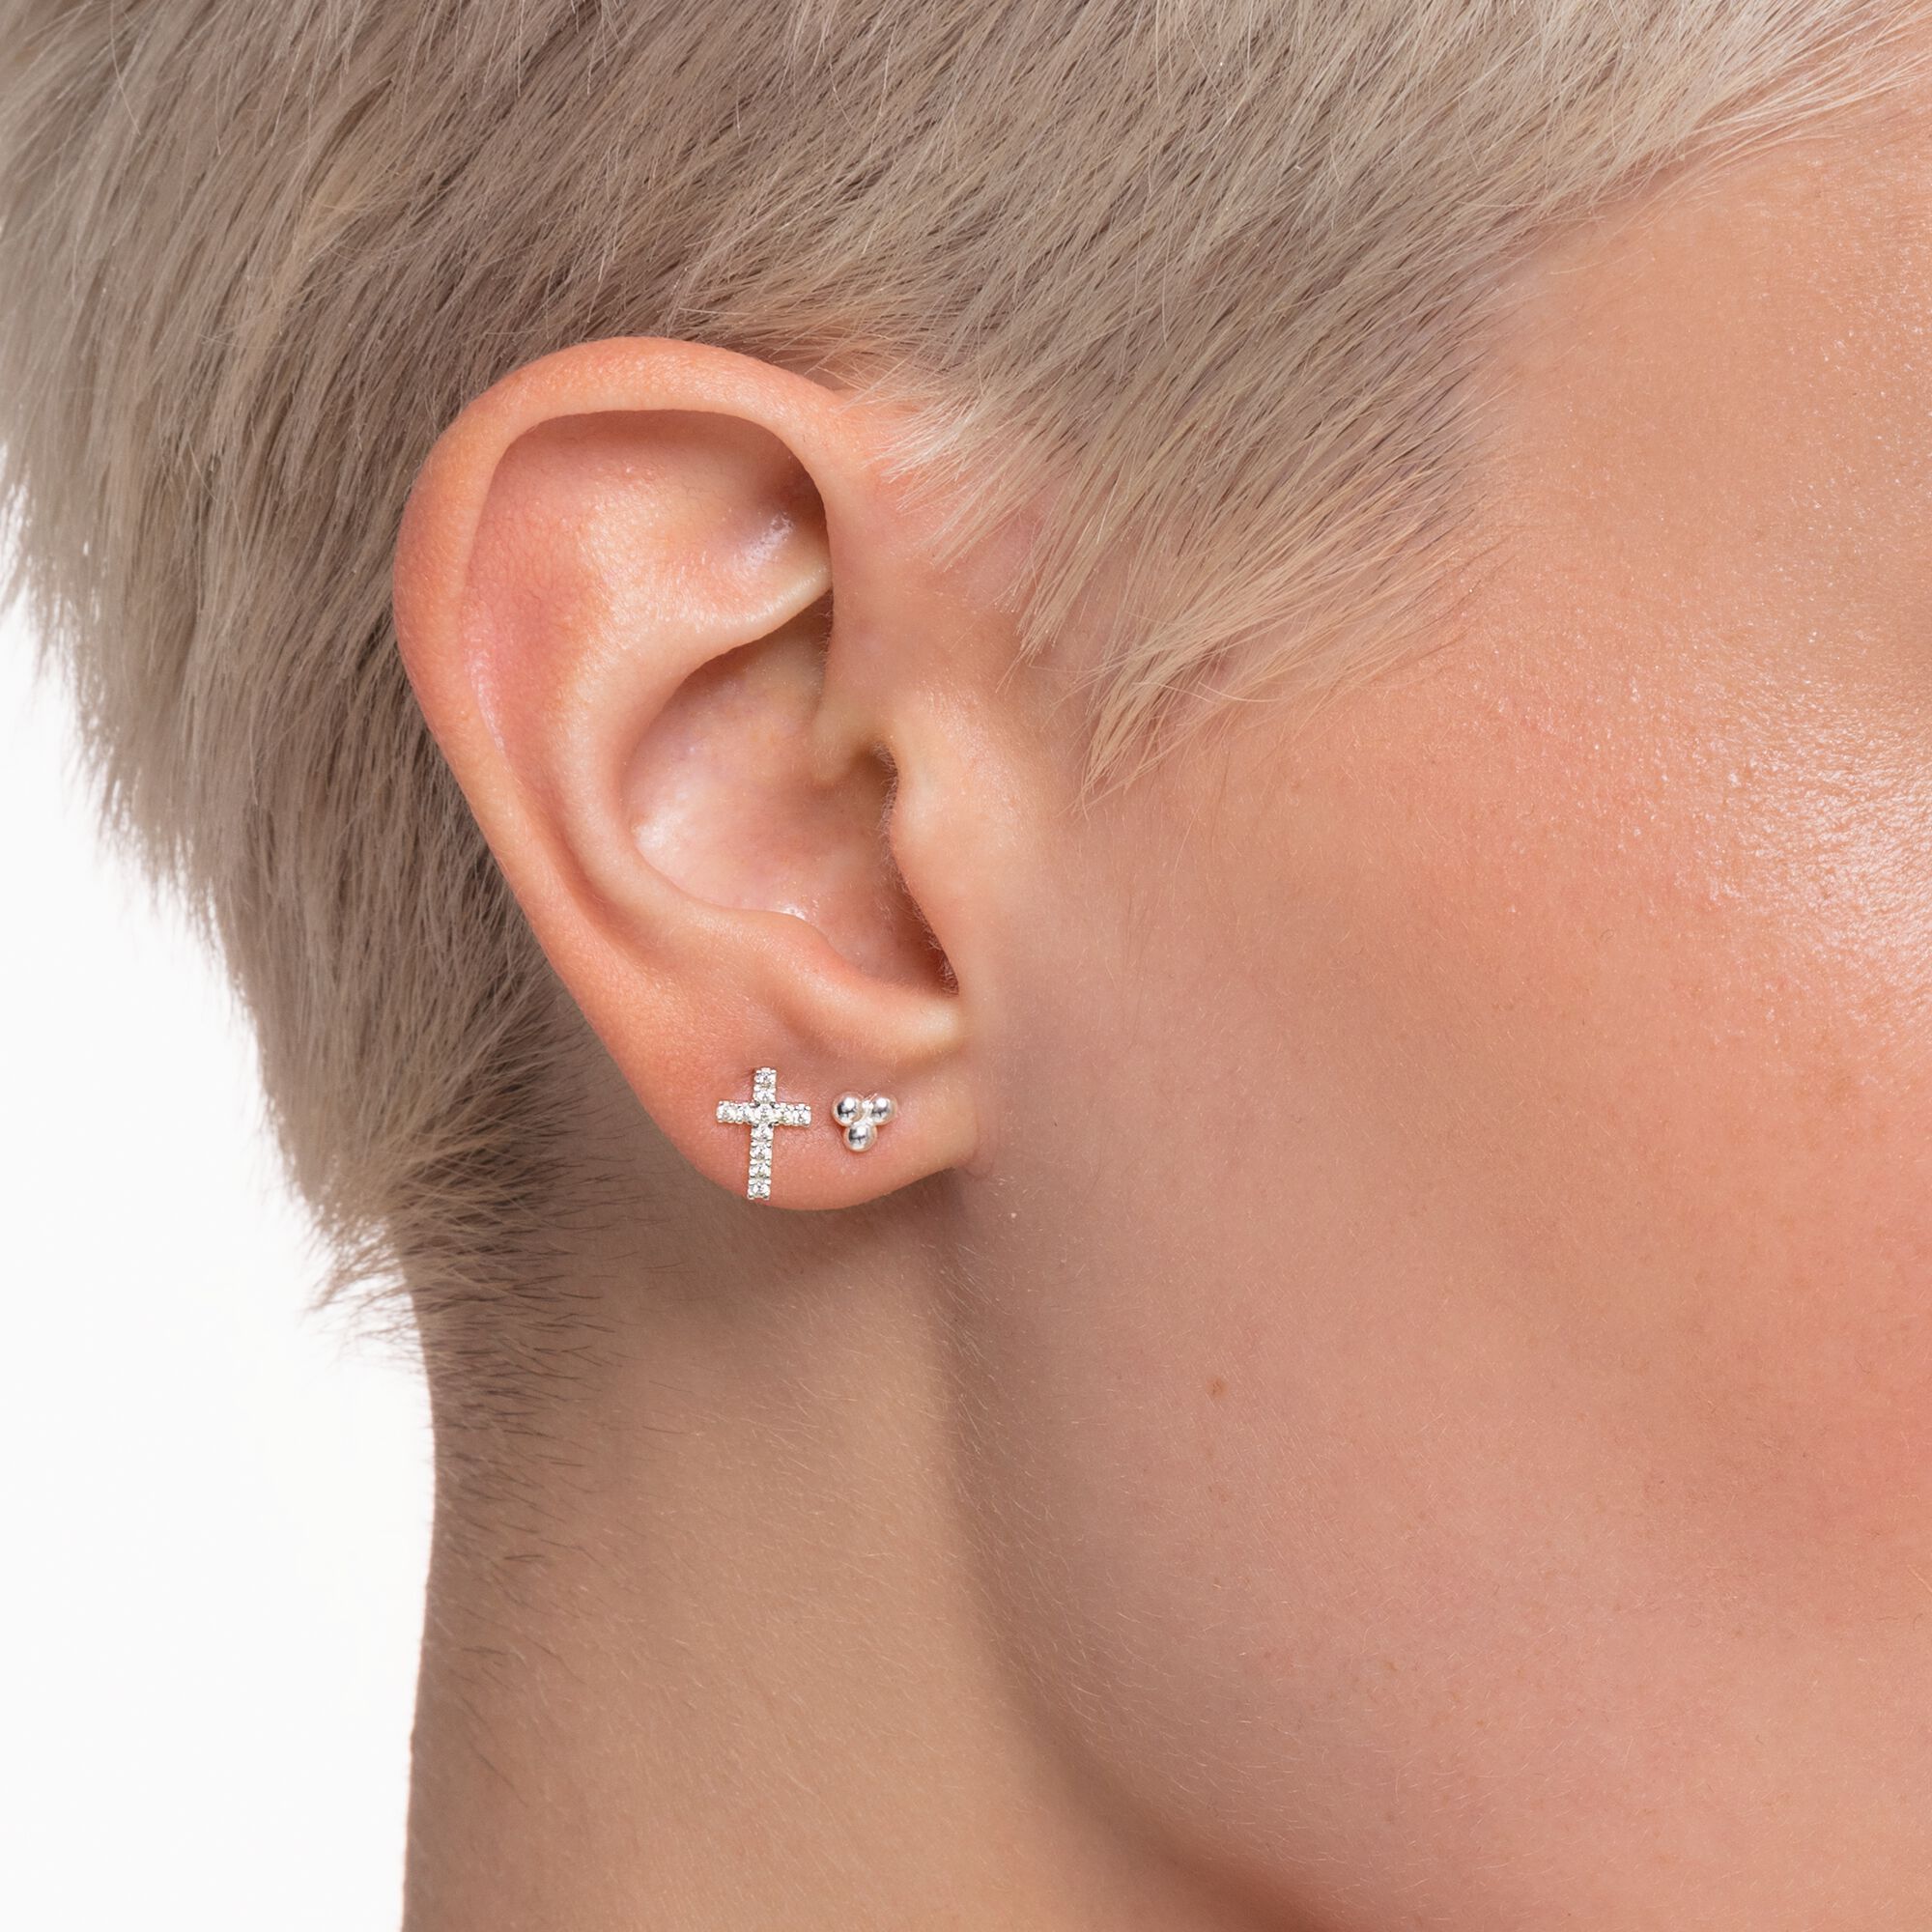 Ear stud in silver: geometrical THOMAS Small bubbles SABO │